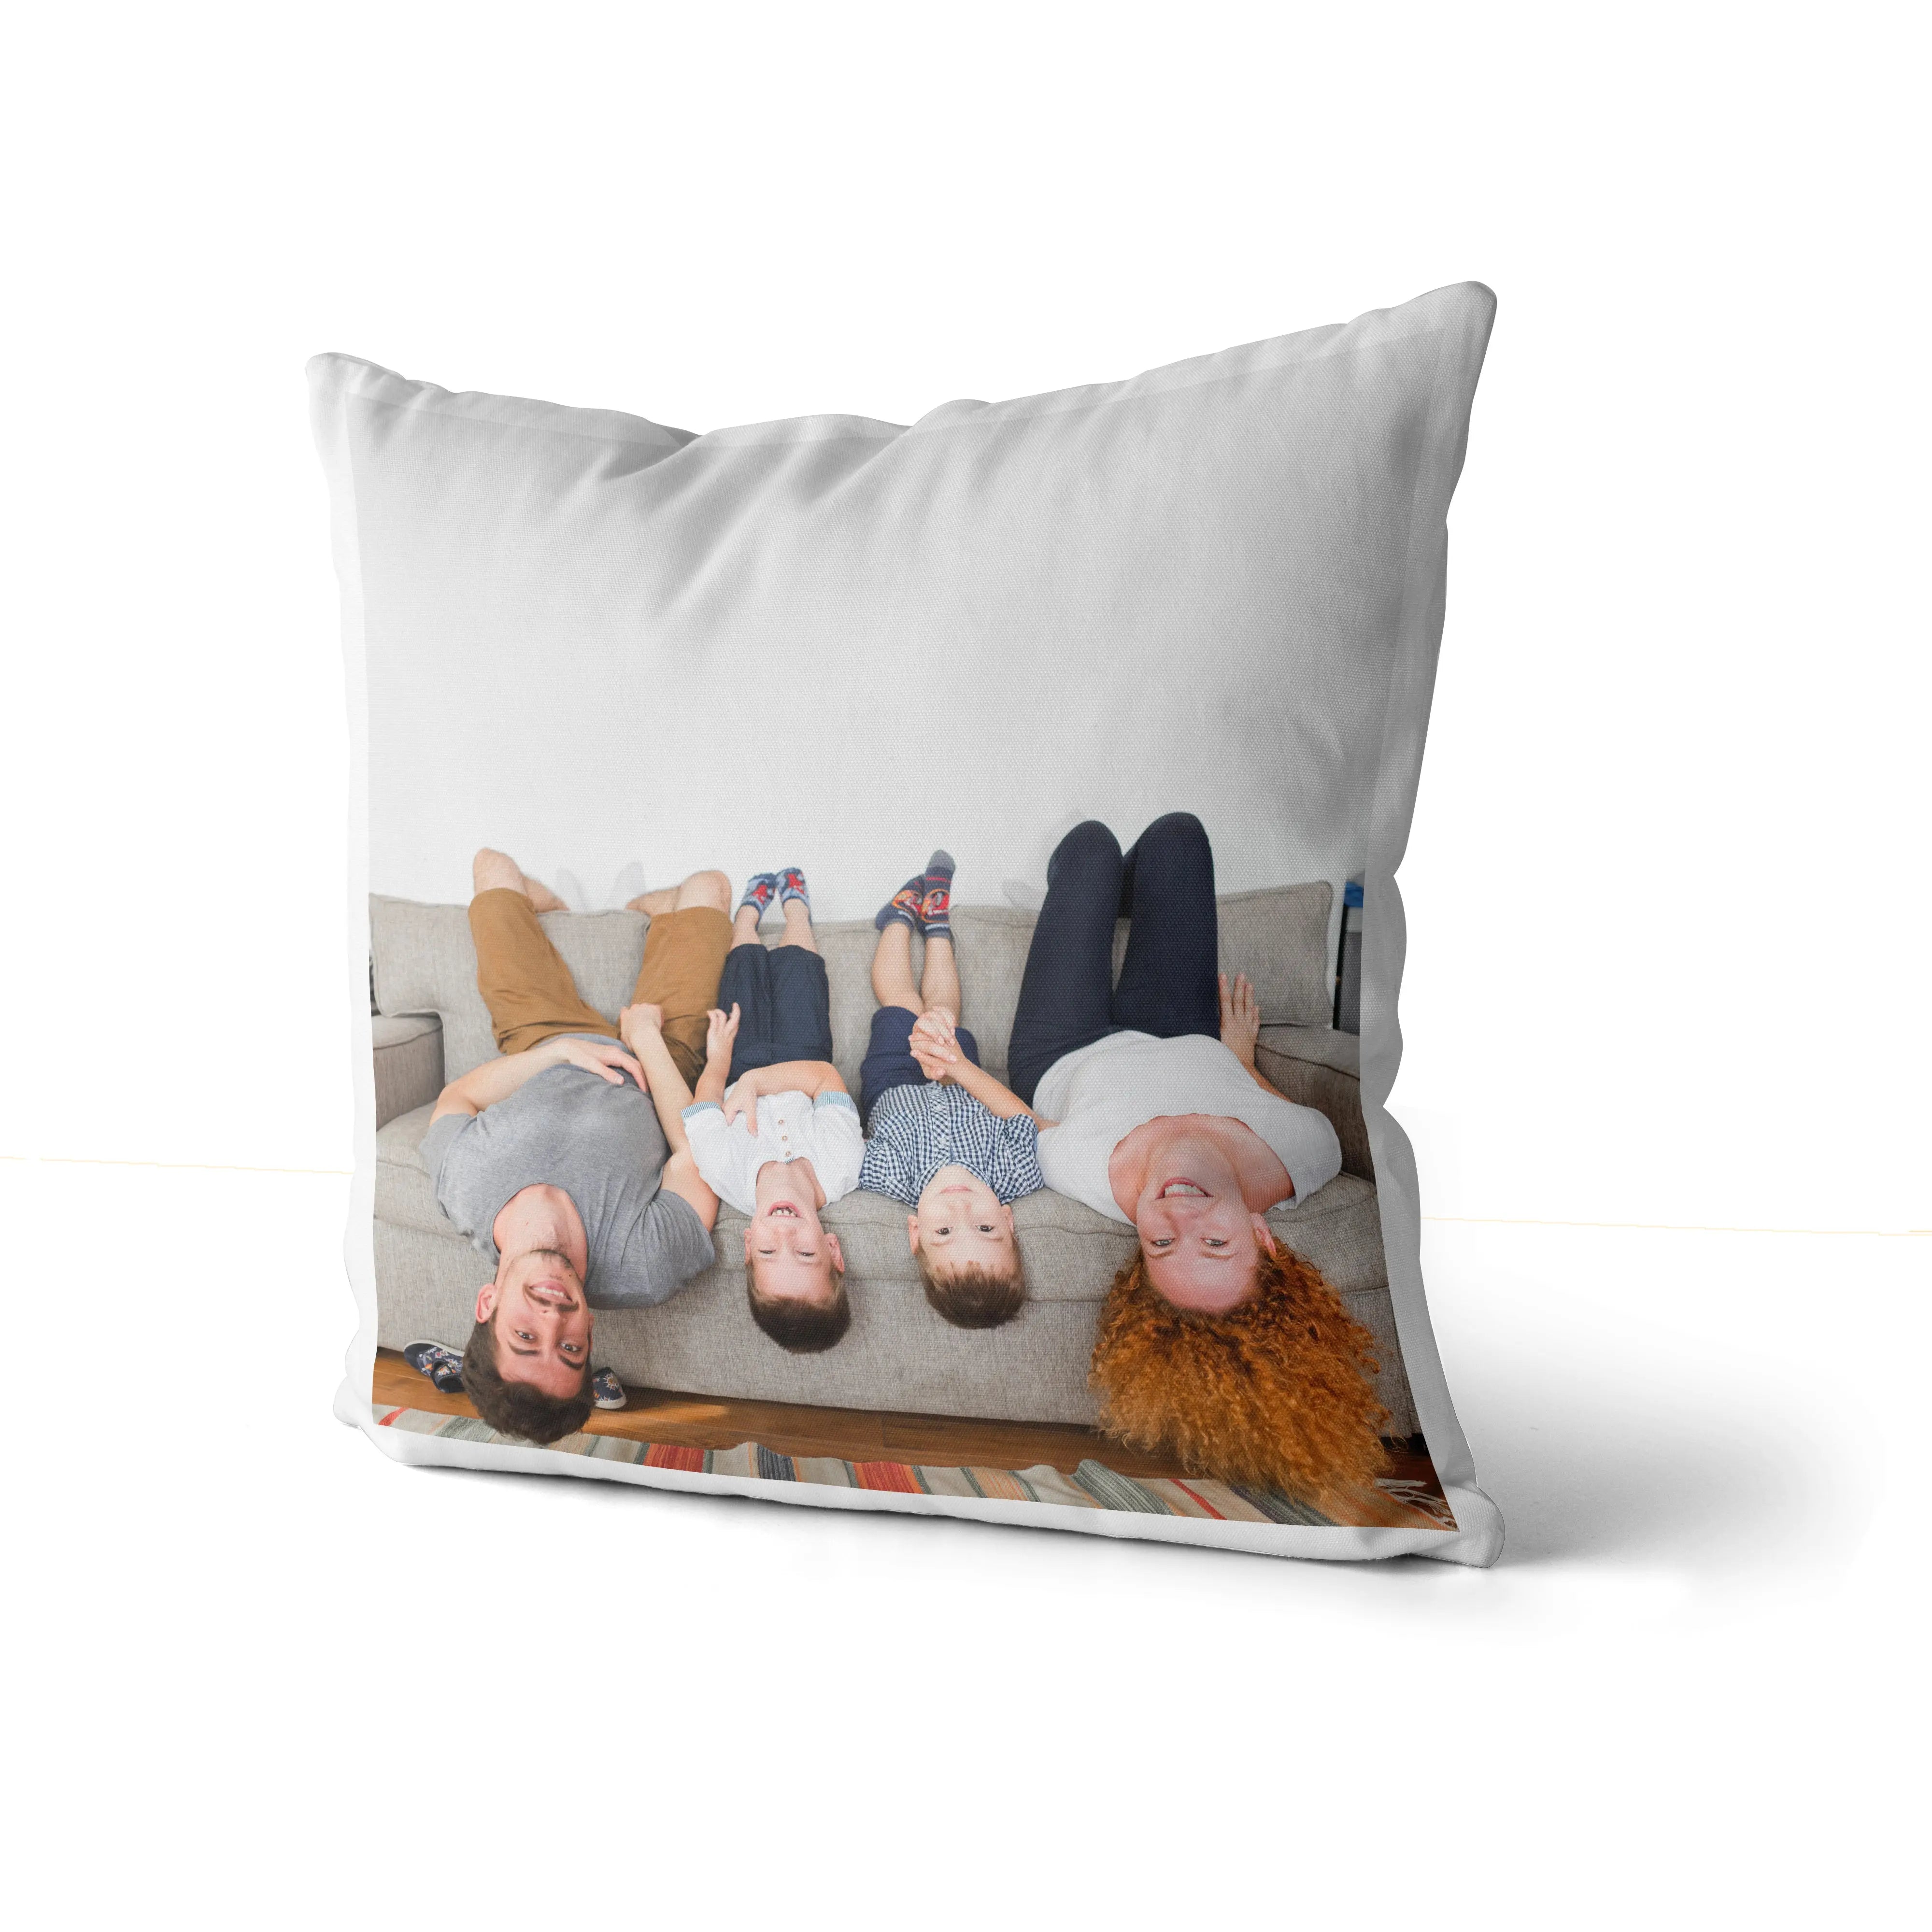 Personalised Cushion 1 Image Perfect Gift Décor - Fathers Day Gift - CushionPop